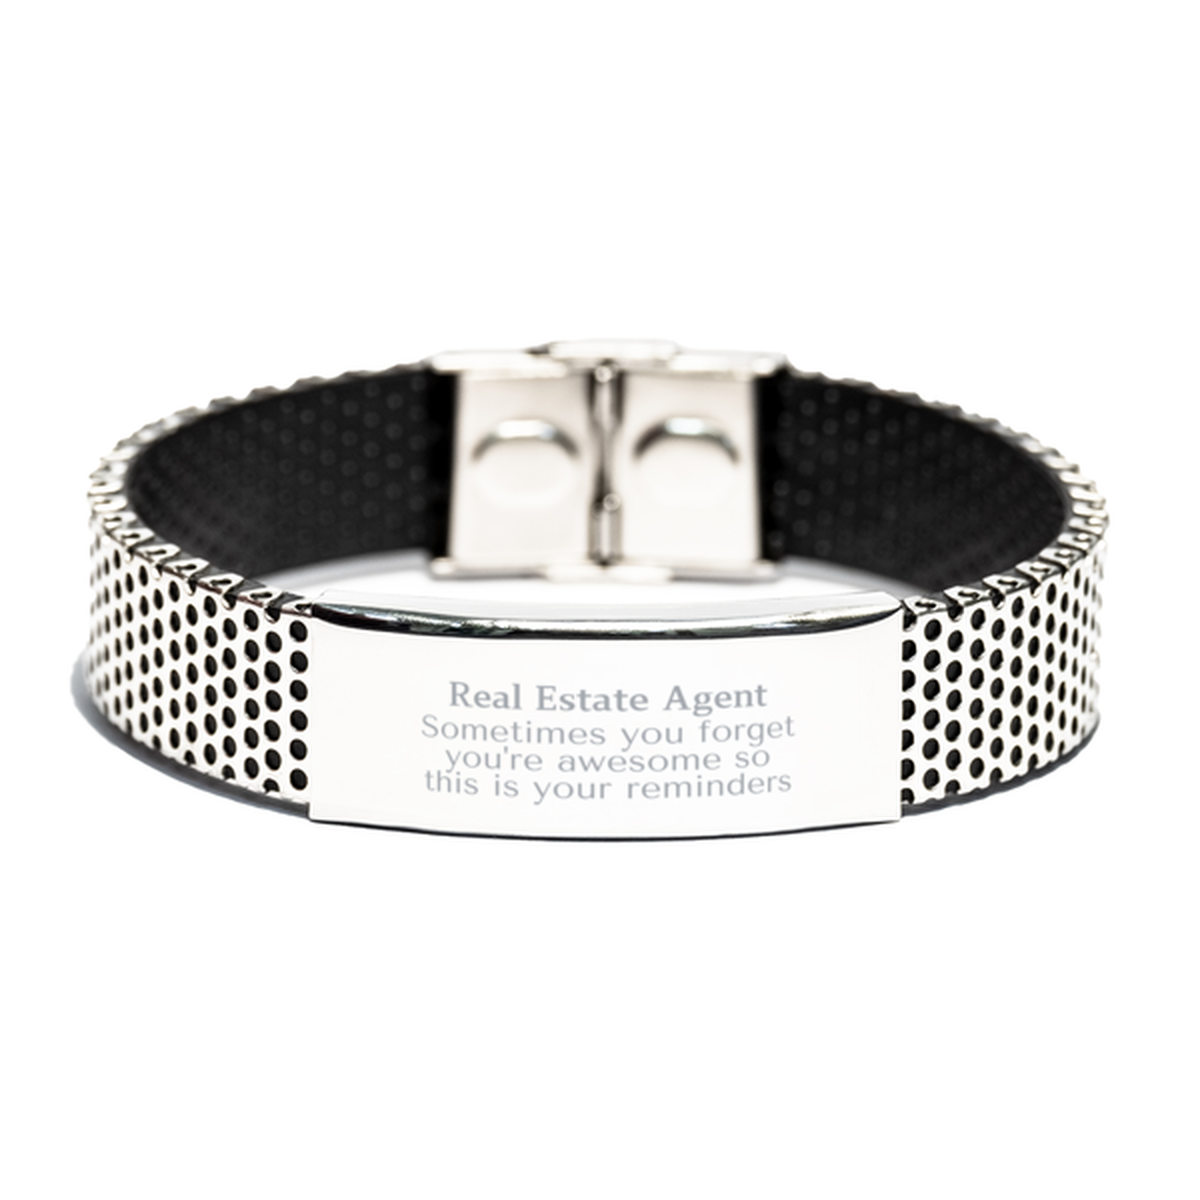 Sentimental Real Estate Agent Stainless Steel Bracelet, Real Estate Agent Sometimes you forget you're awesome so this is your reminders, Graduation Christmas Birthday Gifts for Real Estate Agent, Men, Women, Coworkers